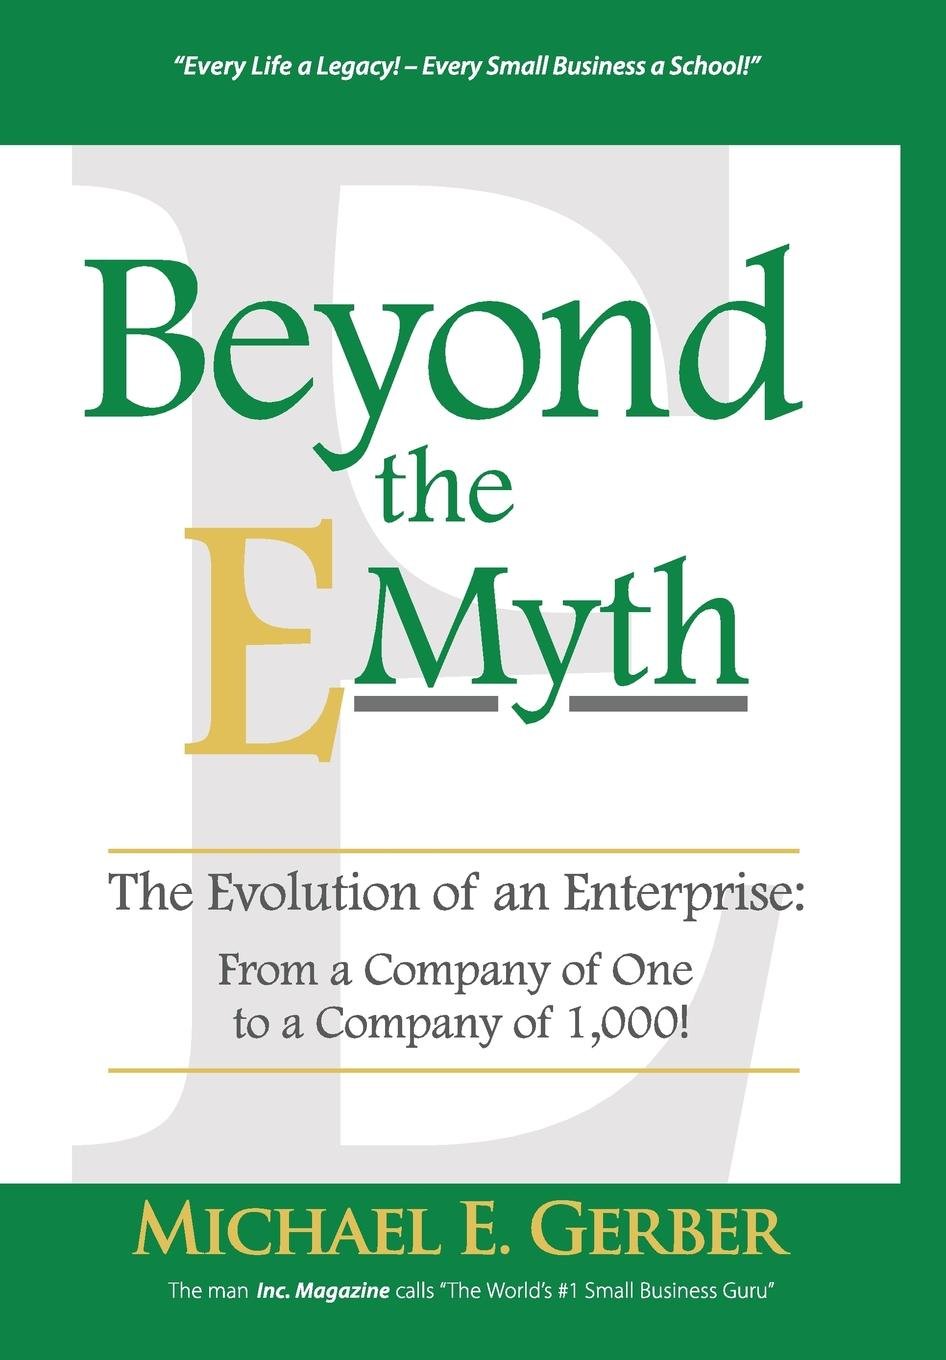 Michale E. Gerber - Beyond The E-Myth - The Evolution of an Enterprise - From a Company of One to a Company of 1,000